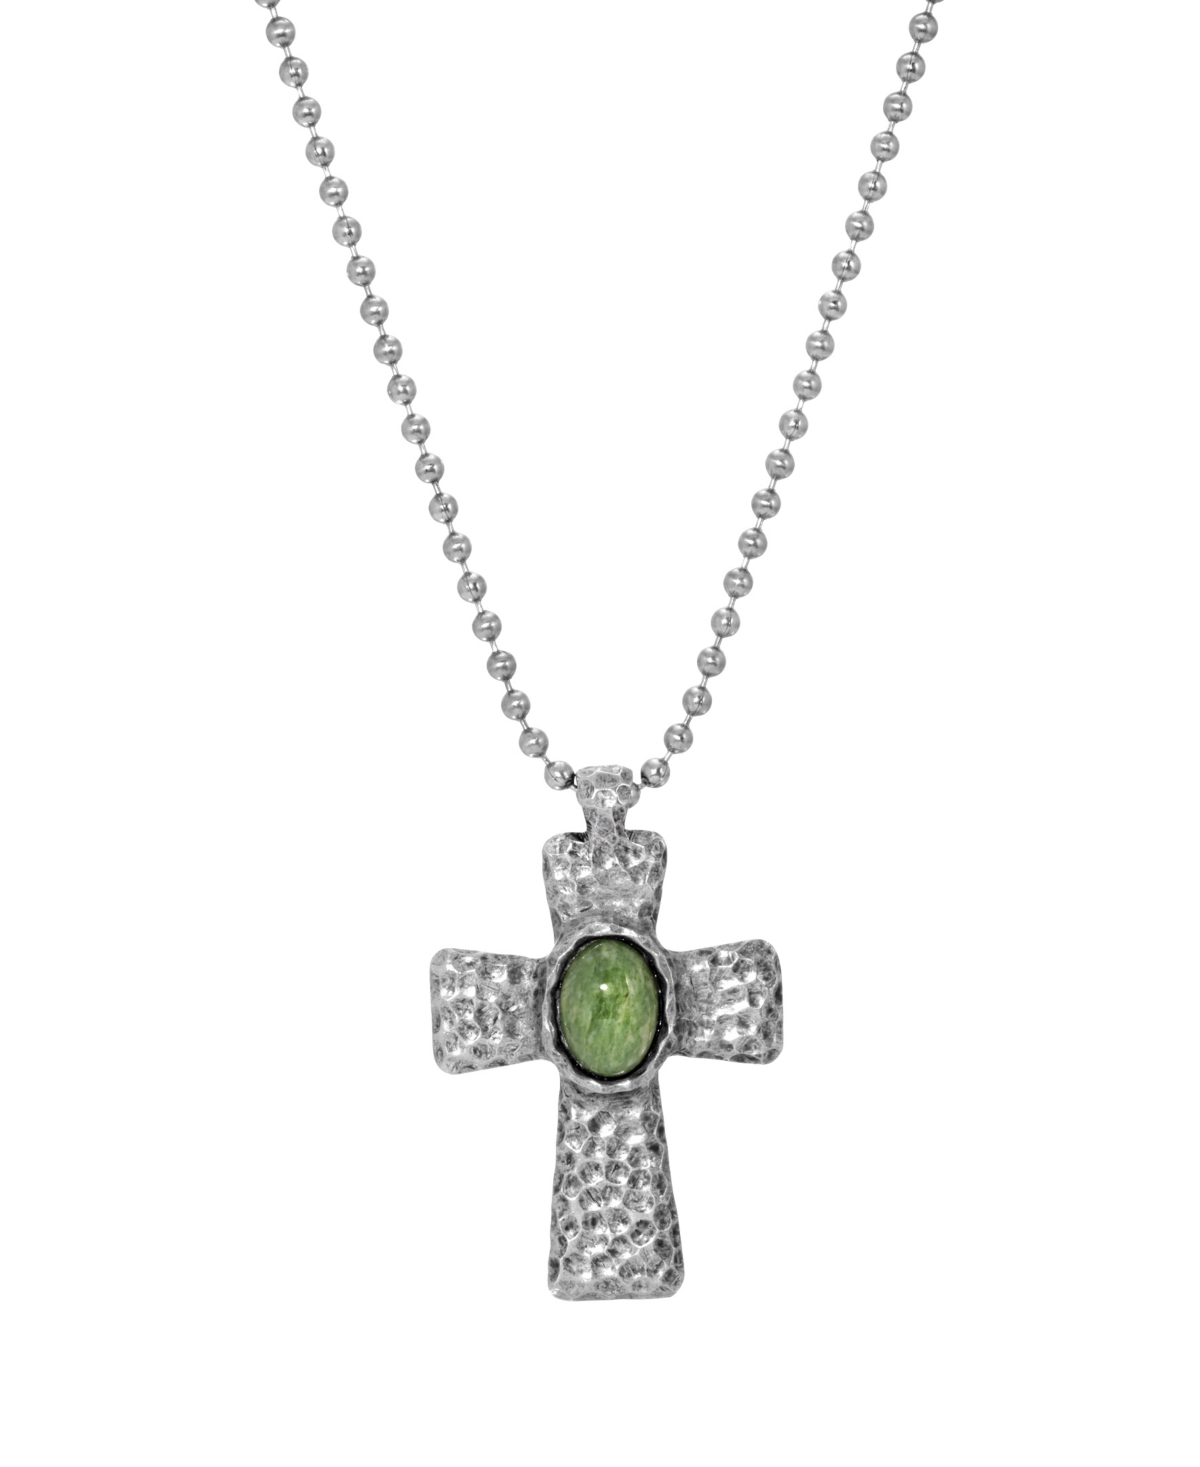 Men's Silver-Tone Green Hammered Metal Cross Necklace - Green